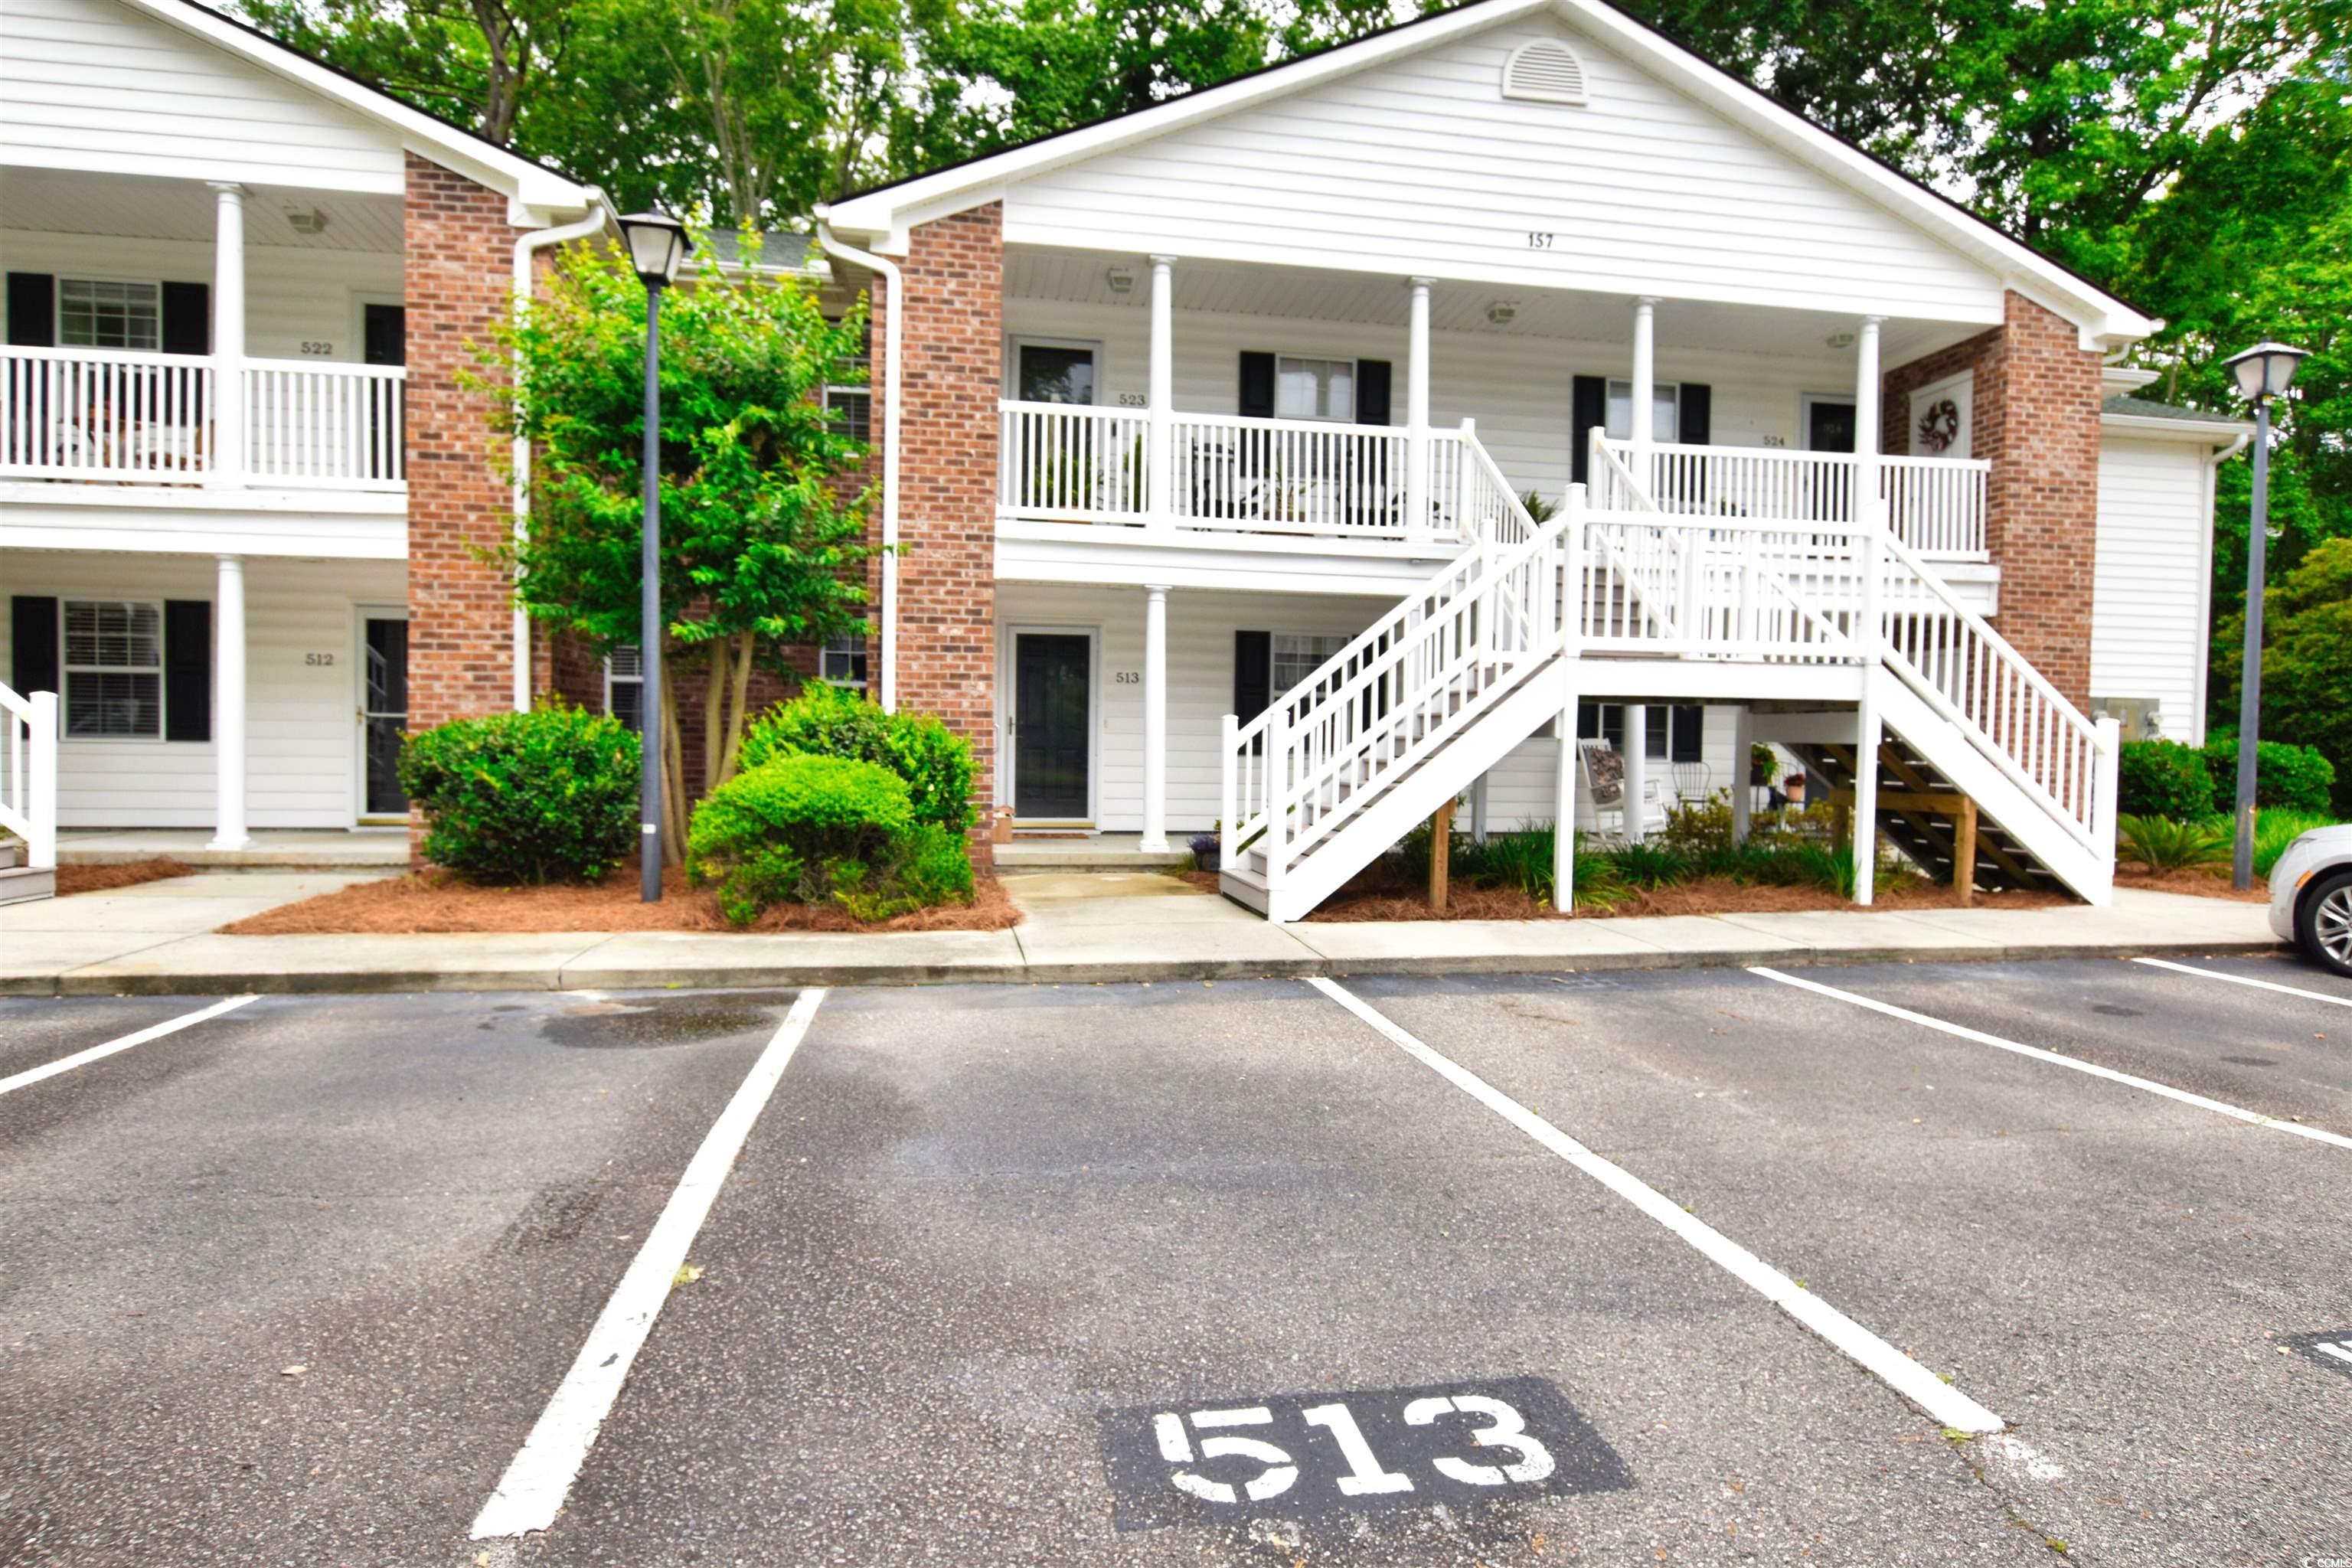 take a look at this ground-floor condo just steps from the beach! this 2-bedroom unit in the sought-after egret run community offers single-level living and is conveniently close to public beach access in pawleys island, sc. the outstanding, low, monthly hoa  at egret run ,covers insurance, basic cable, water, sewer, landscaping, and maintenance of all common areas, including the spacious community pool. inside, you'll find luxury cambria quartz countertops in the kitchen and high-end coretec vinyl plank flooring throughout. this is a must-see if you're looking for an affordable beachside gem!